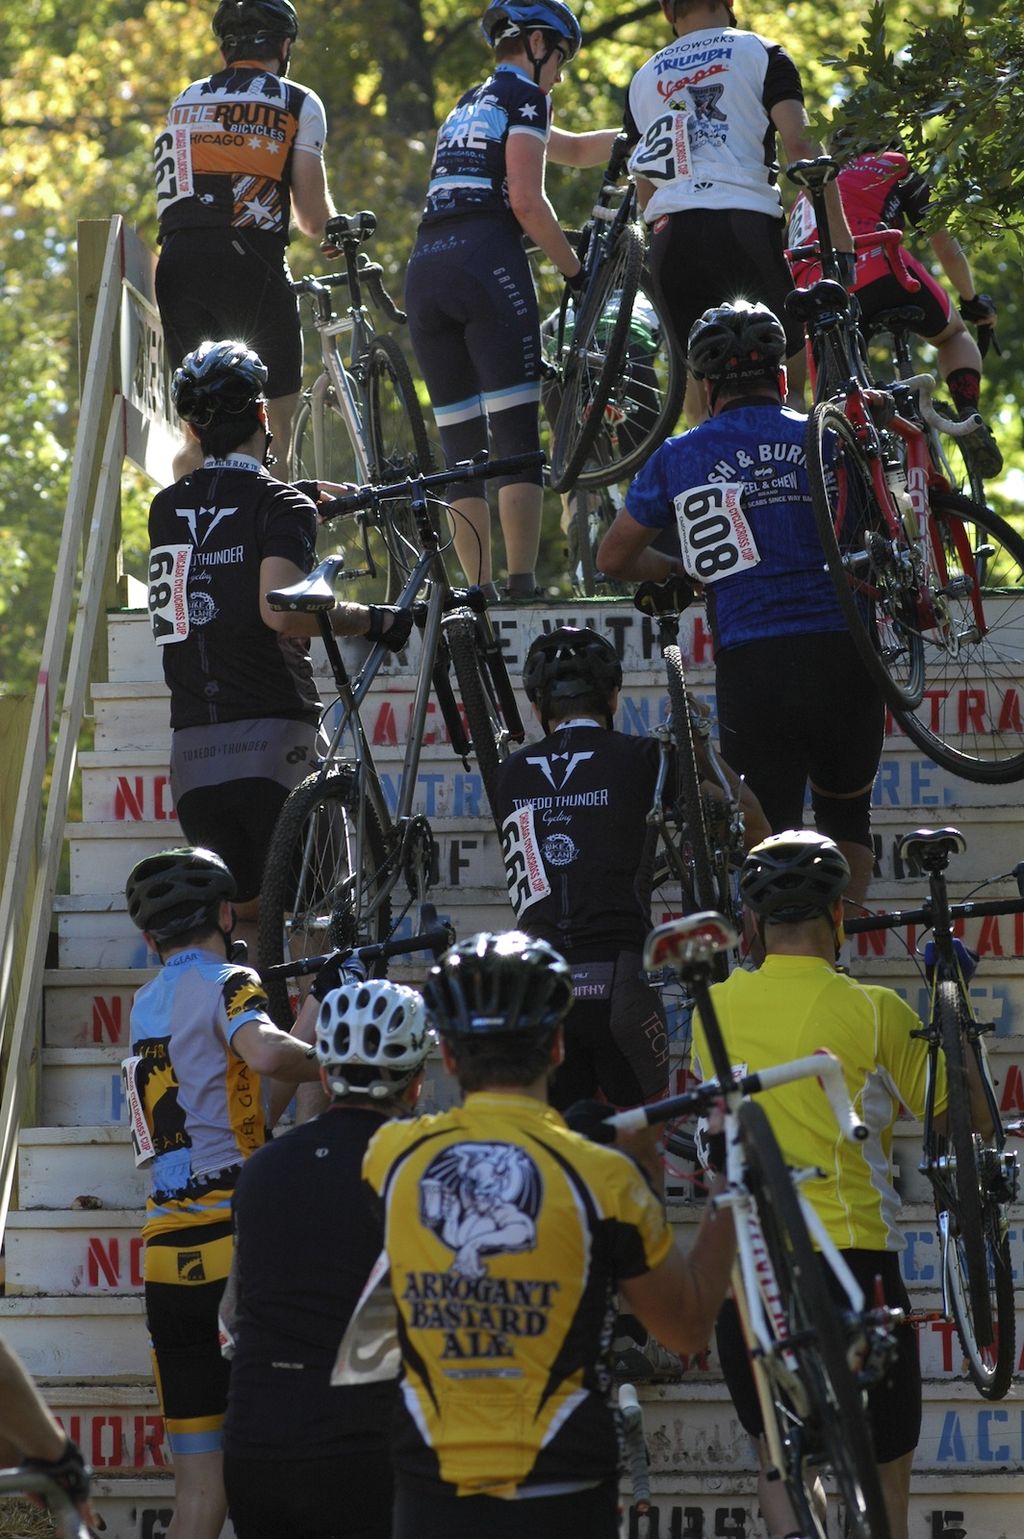 Chicago Cross Cup #2 Hopkins Park in Dekalb Illinois — Gallery, Results - Cyclocross ...